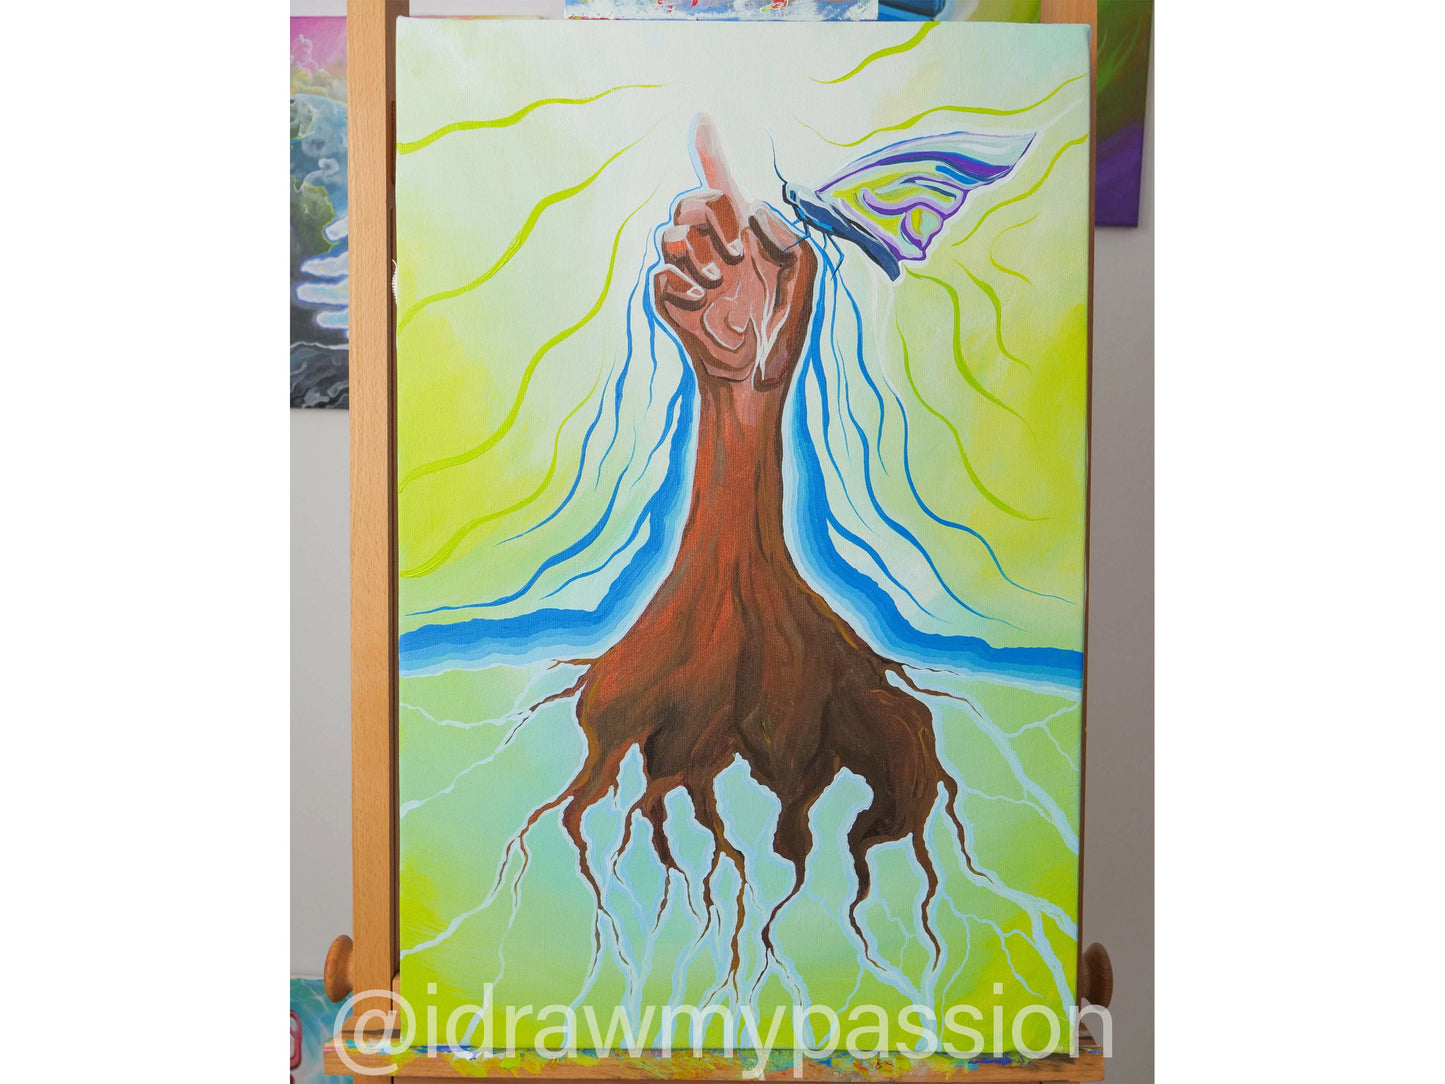 Grounded - Intuitive & Energetic Original Painting